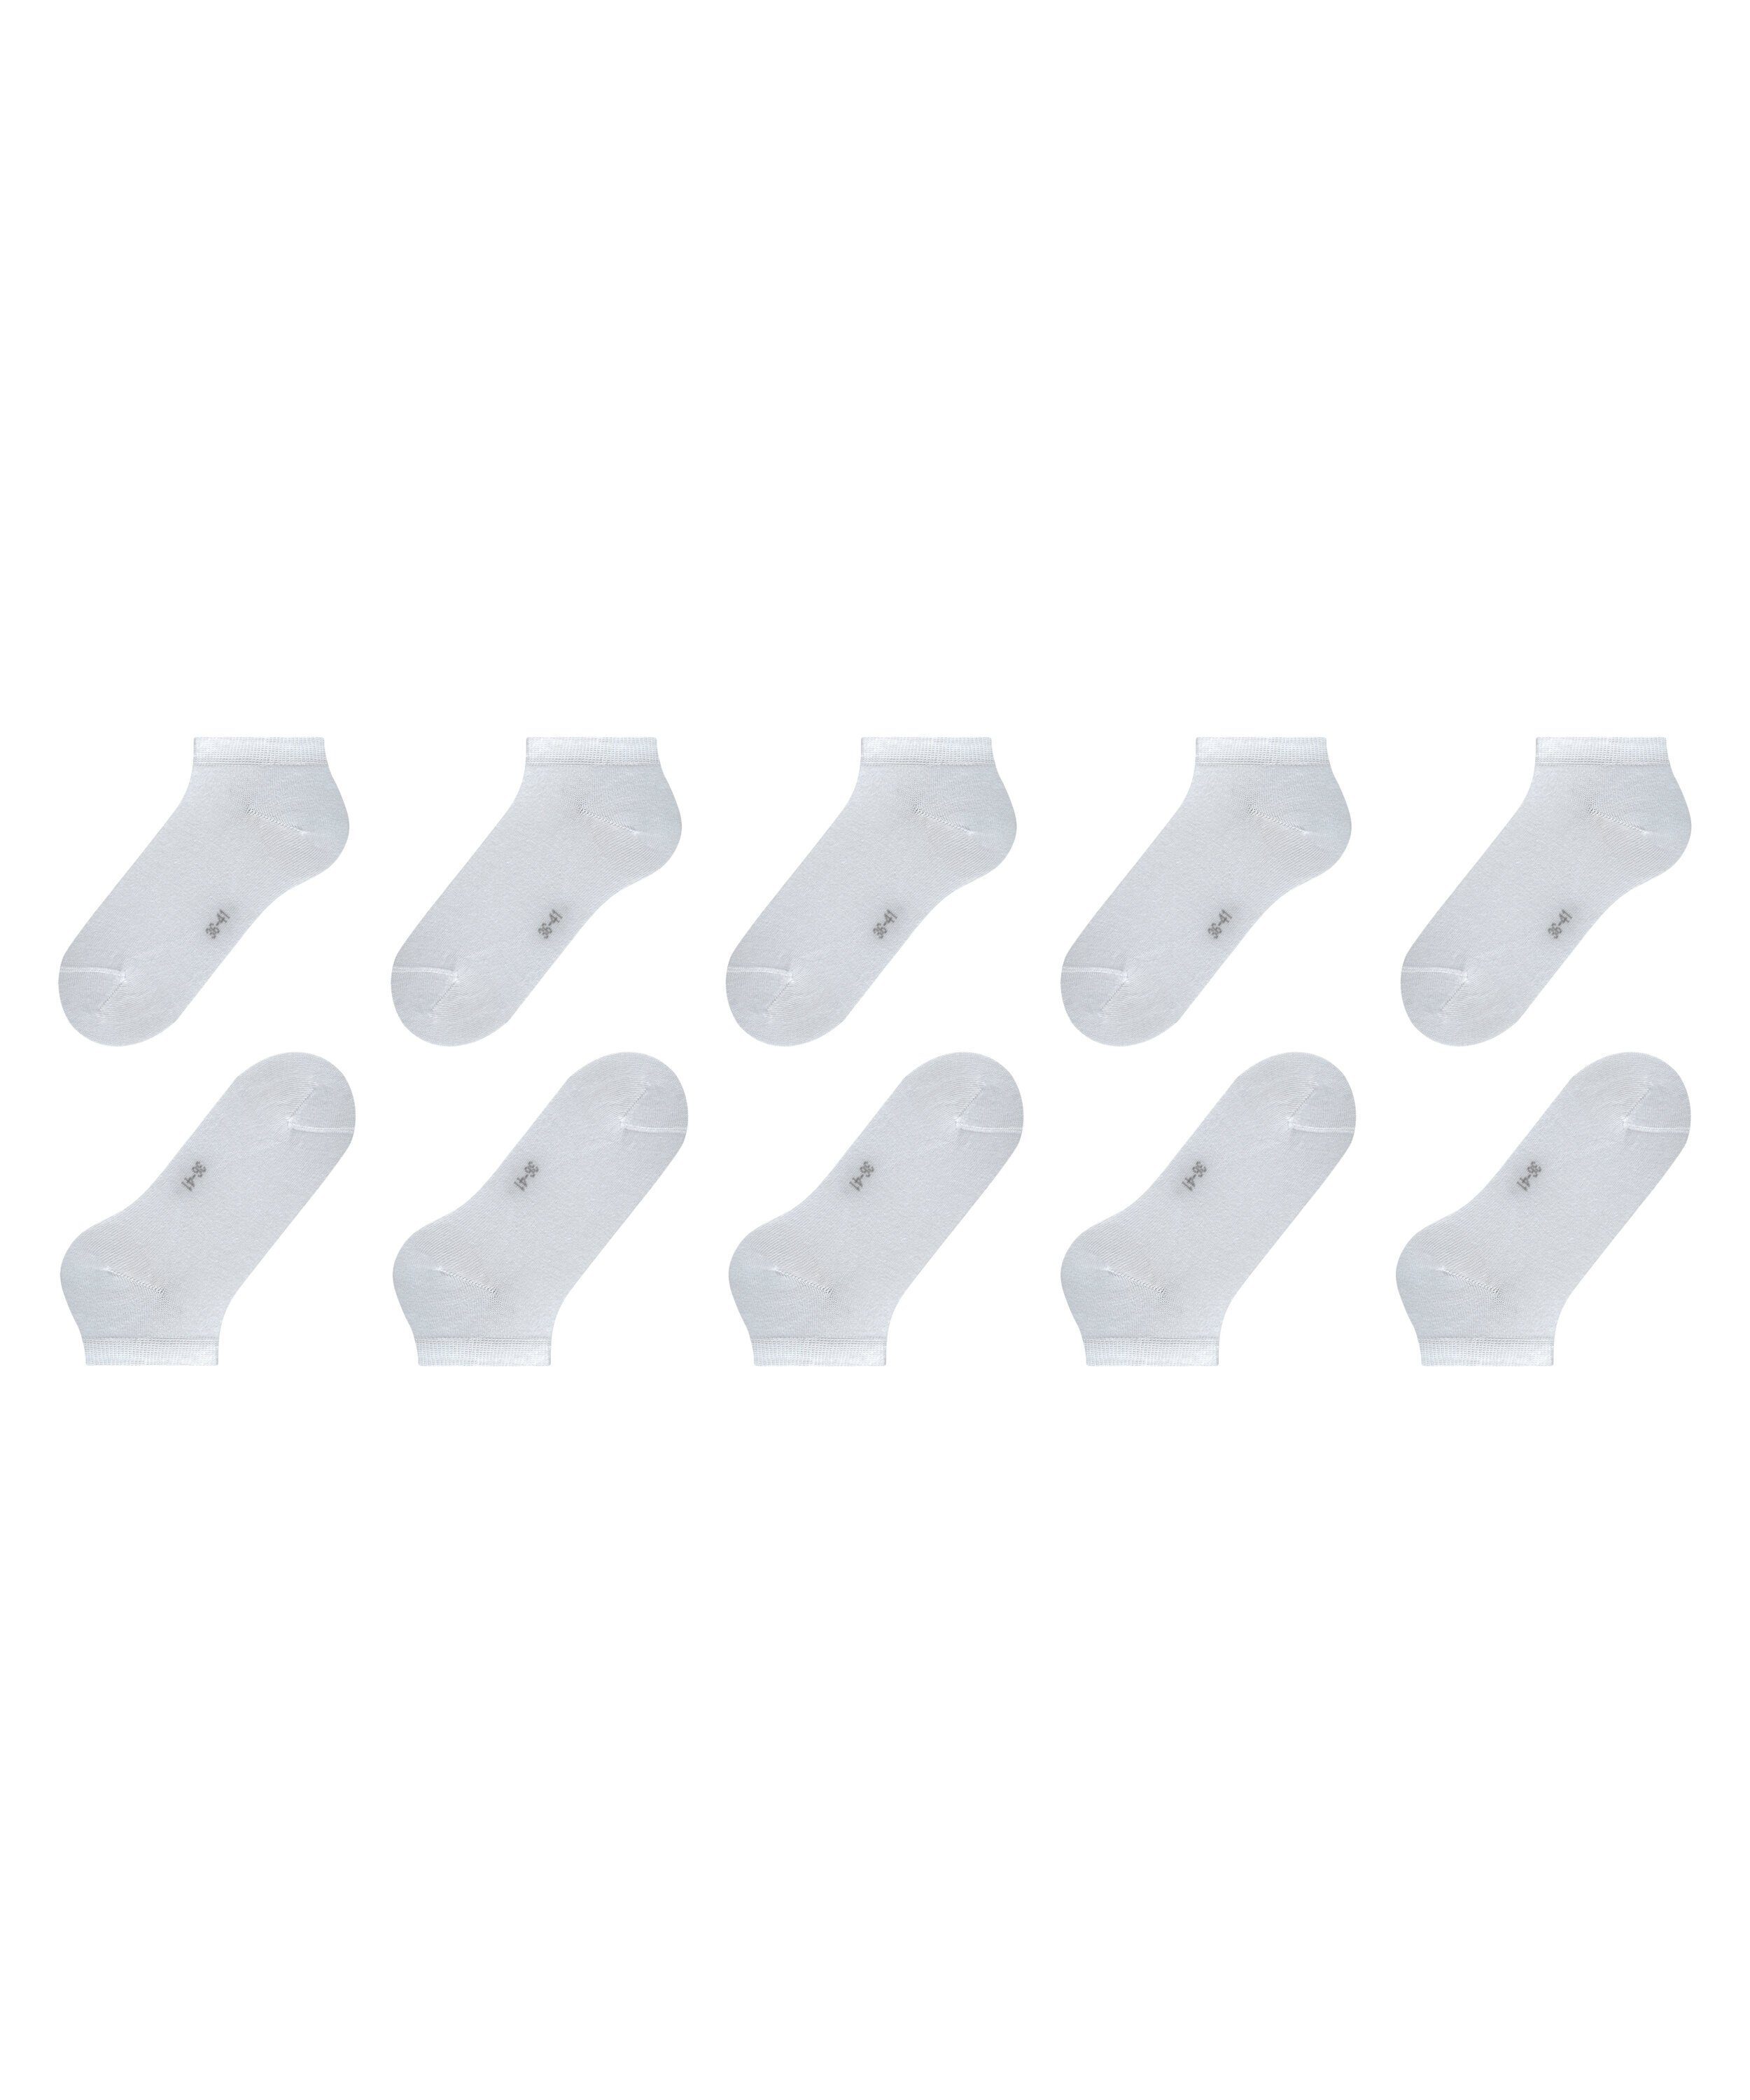 all Solid Esprit One (5-Paar) (Gr. white fits size 36-41) 5-Pack (2000) Sneakersocken